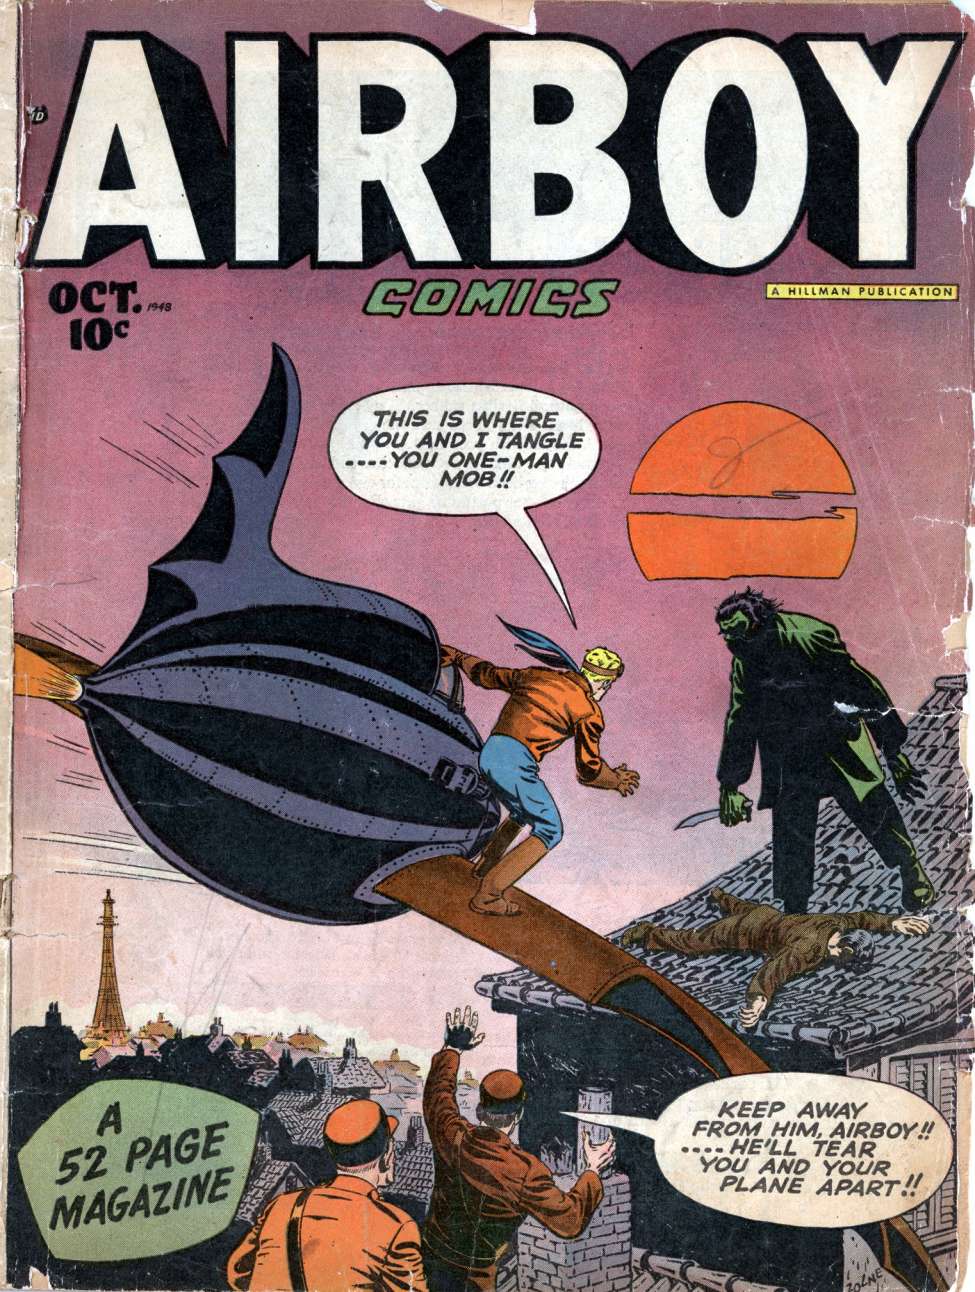 Book Cover For Airboy Comics v5 9